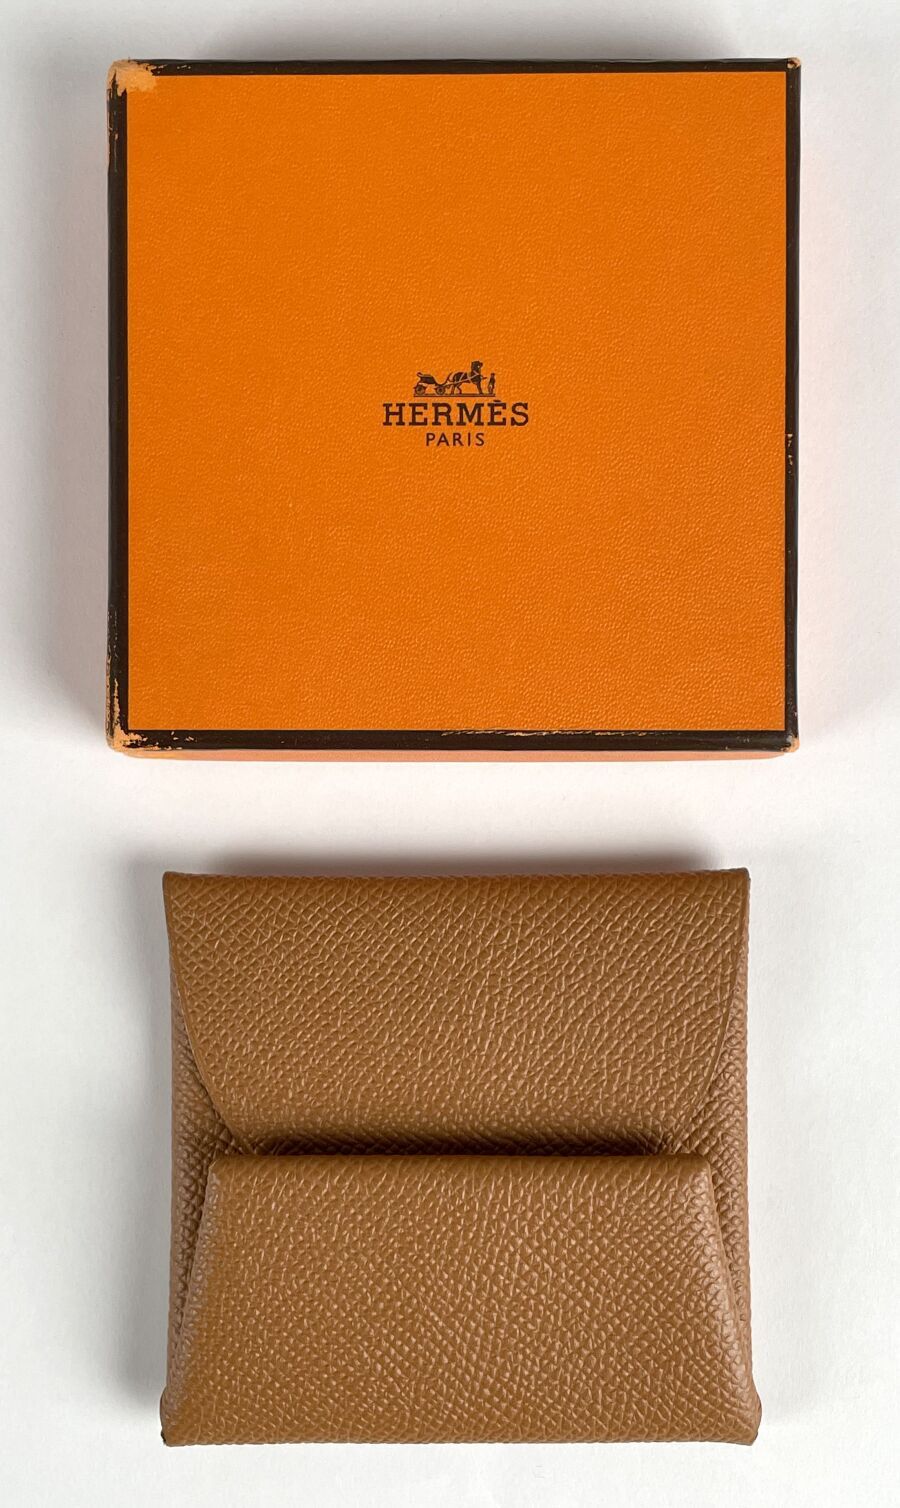 Null HERMÈS Paris
Camel leather wallet with snap closure.
(New condition.)
In it&hellip;